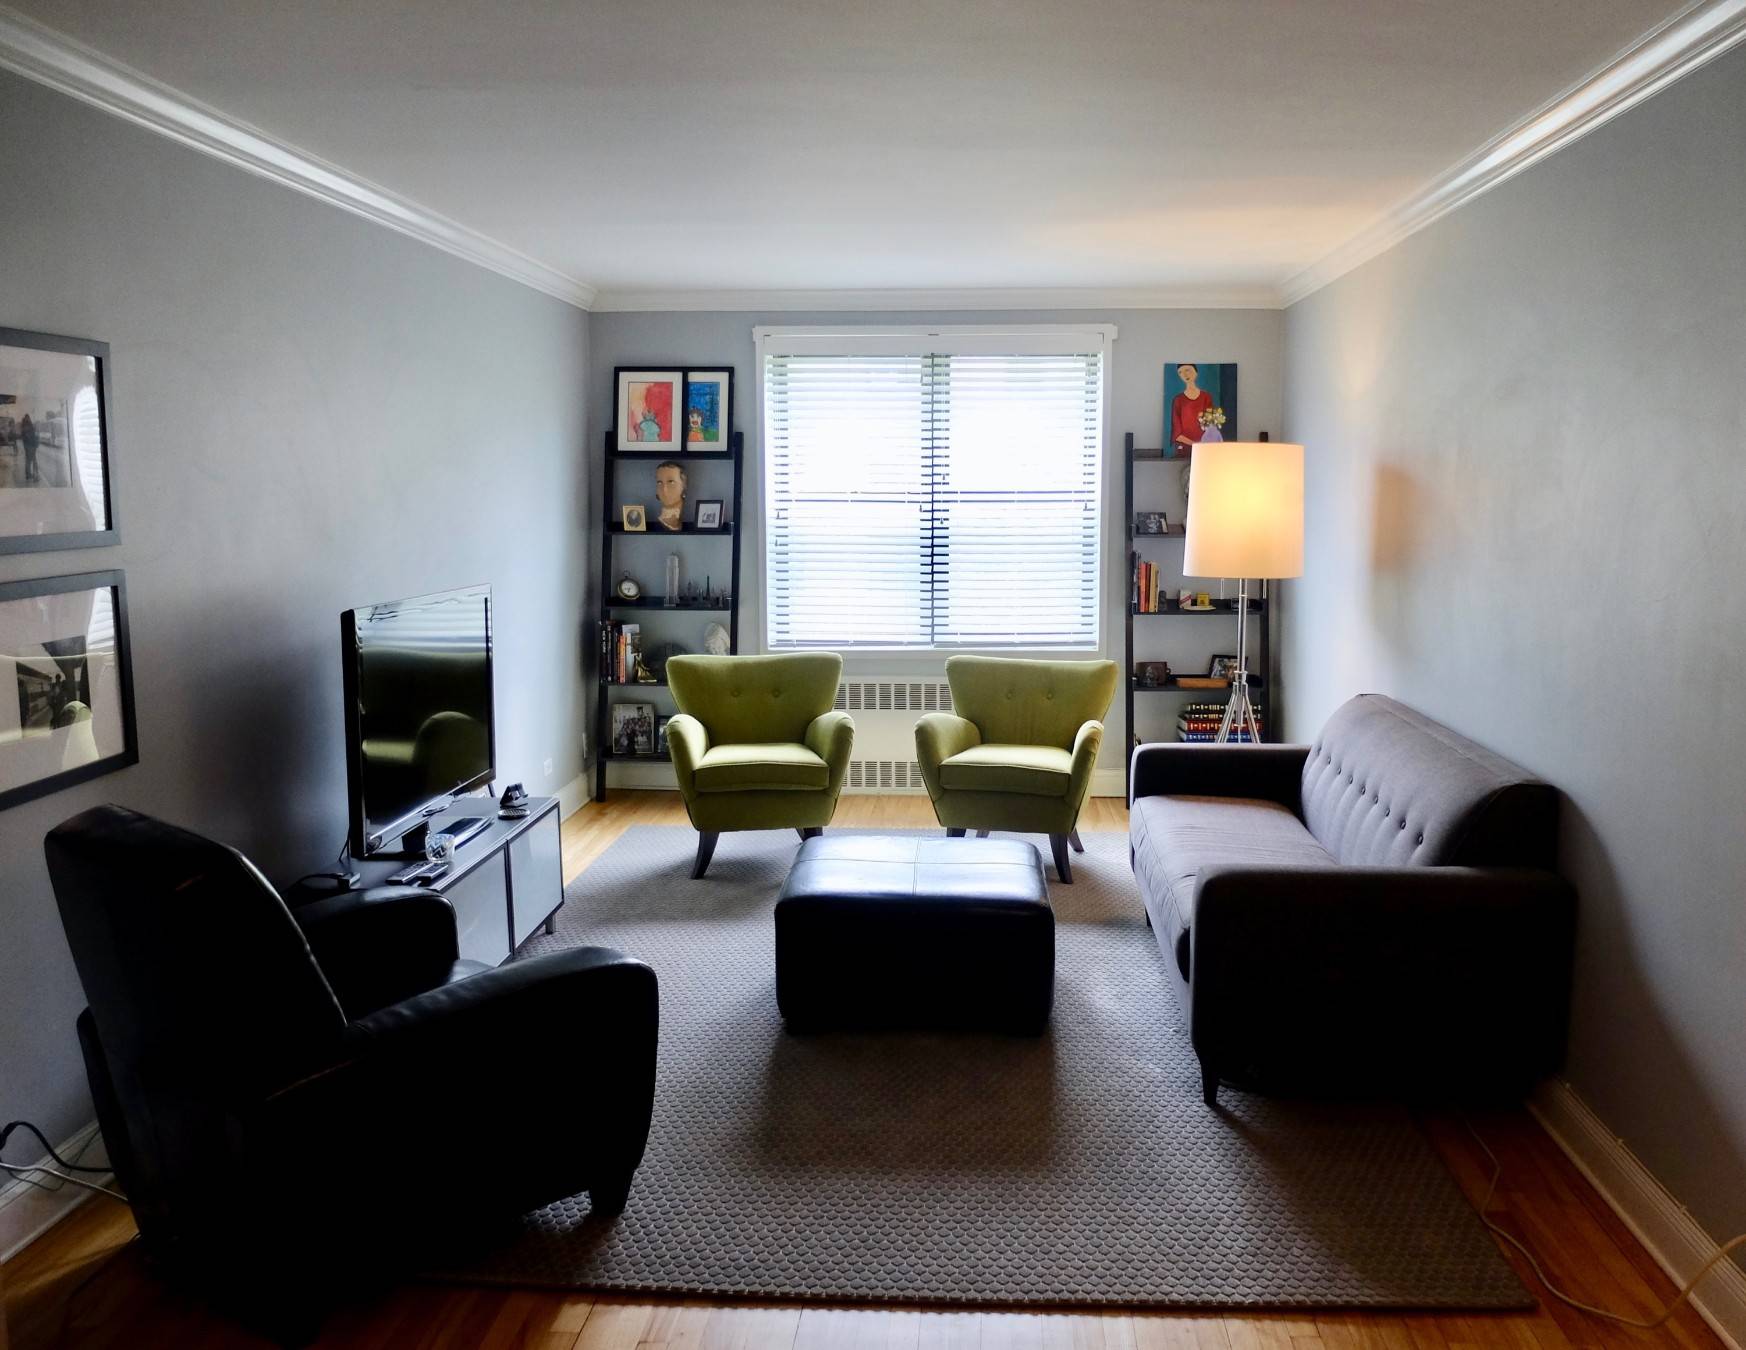 Spacious, renovated and nicely furnished apartment with parking space available for 6 mo or 9 mo lease.